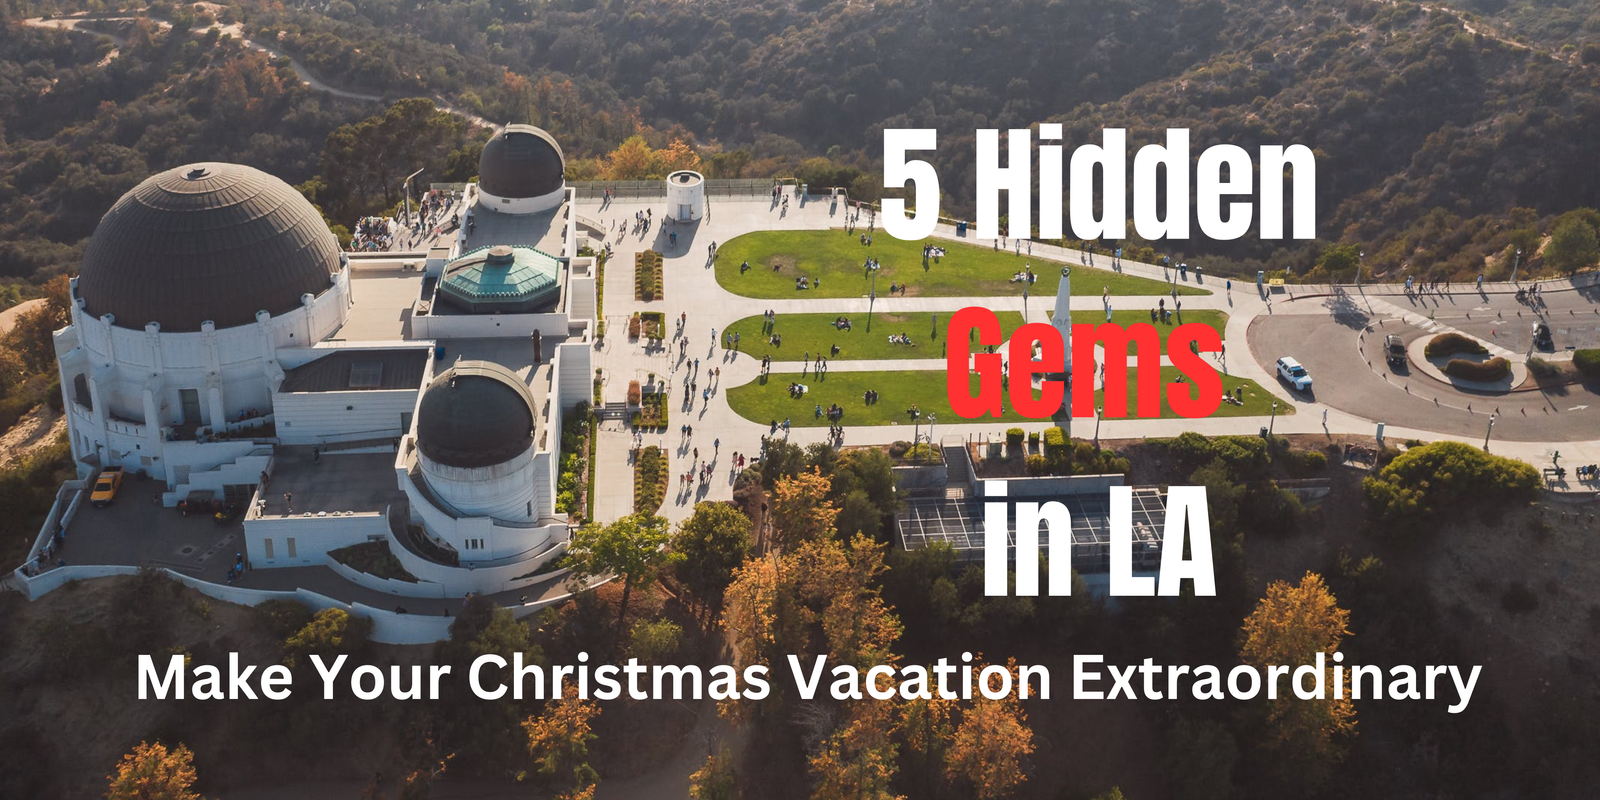 5 Hidden Gems in LA that Make Your Christmas Vacation Extraordinary